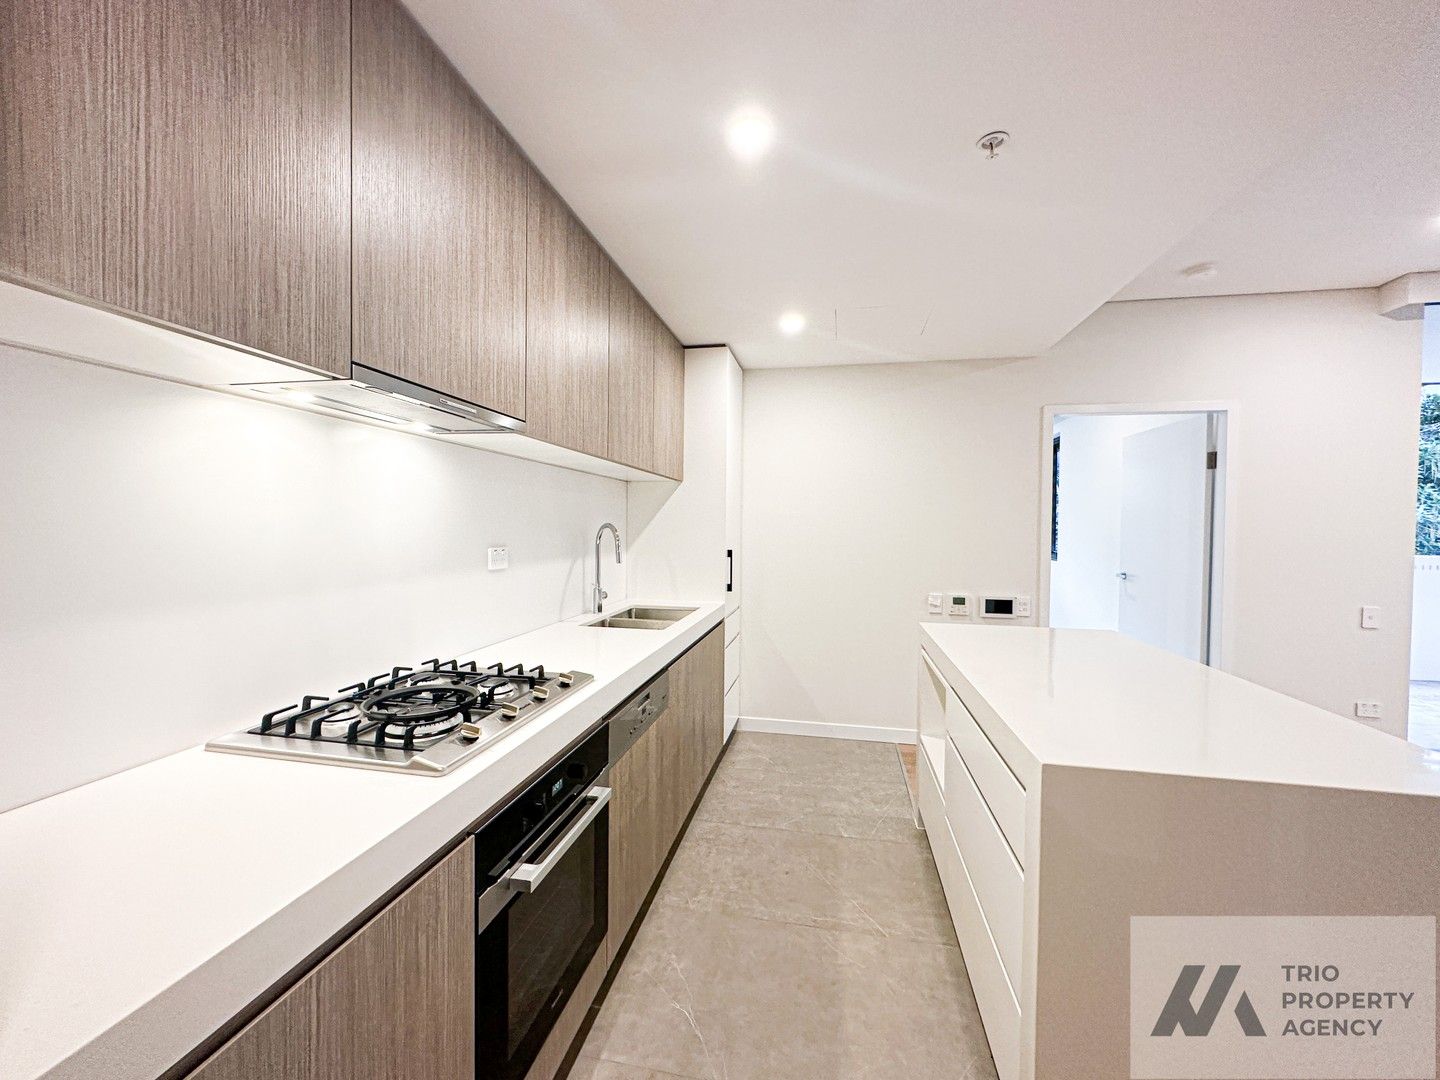 2 bedrooms Apartment / Unit / Flat in 202/1A Crandon Road EPPING NSW, 2121